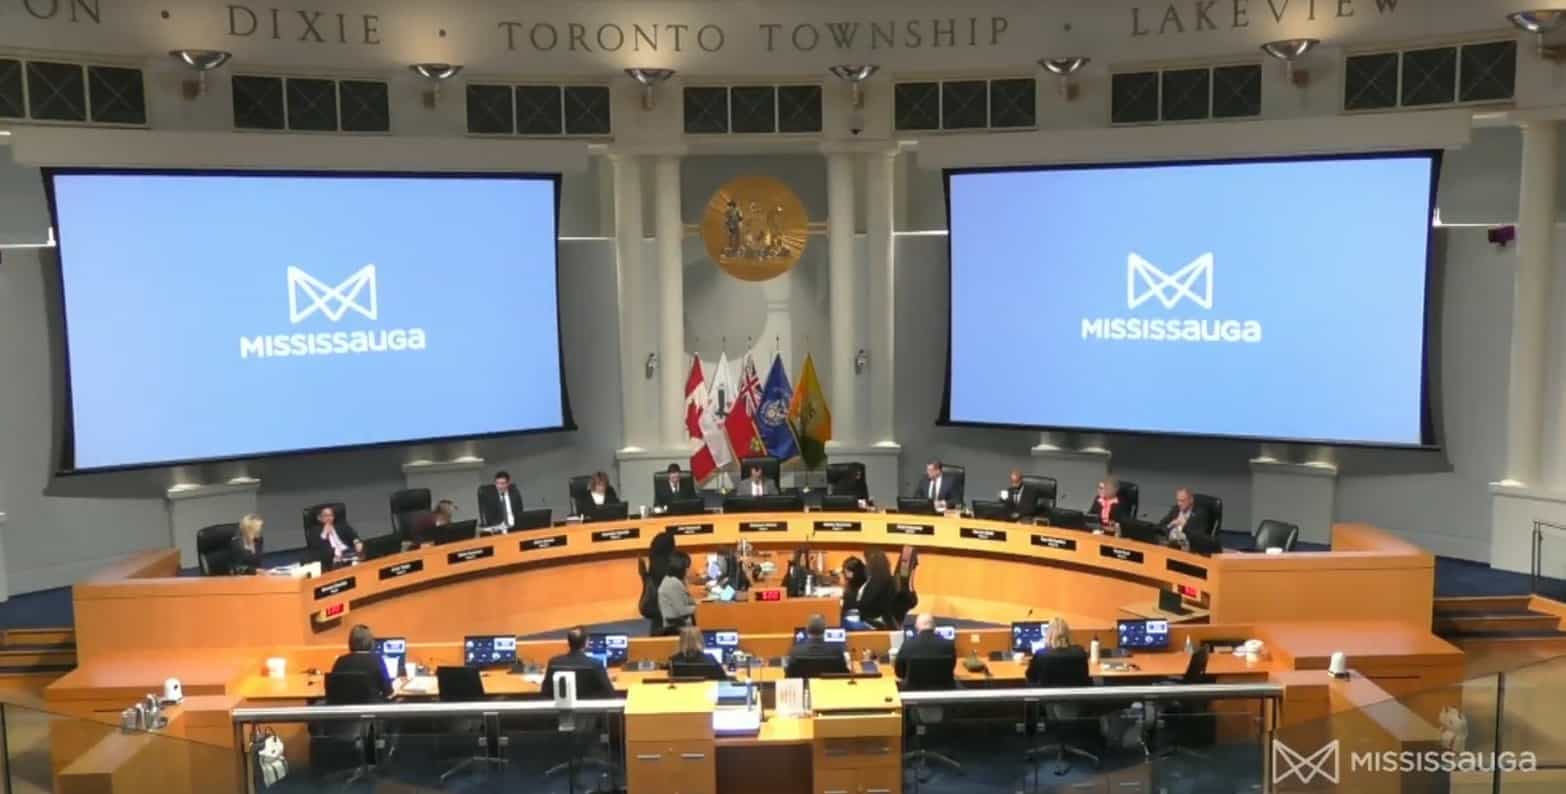 Who's Mississauga's mayor now that Bonnie is gone?